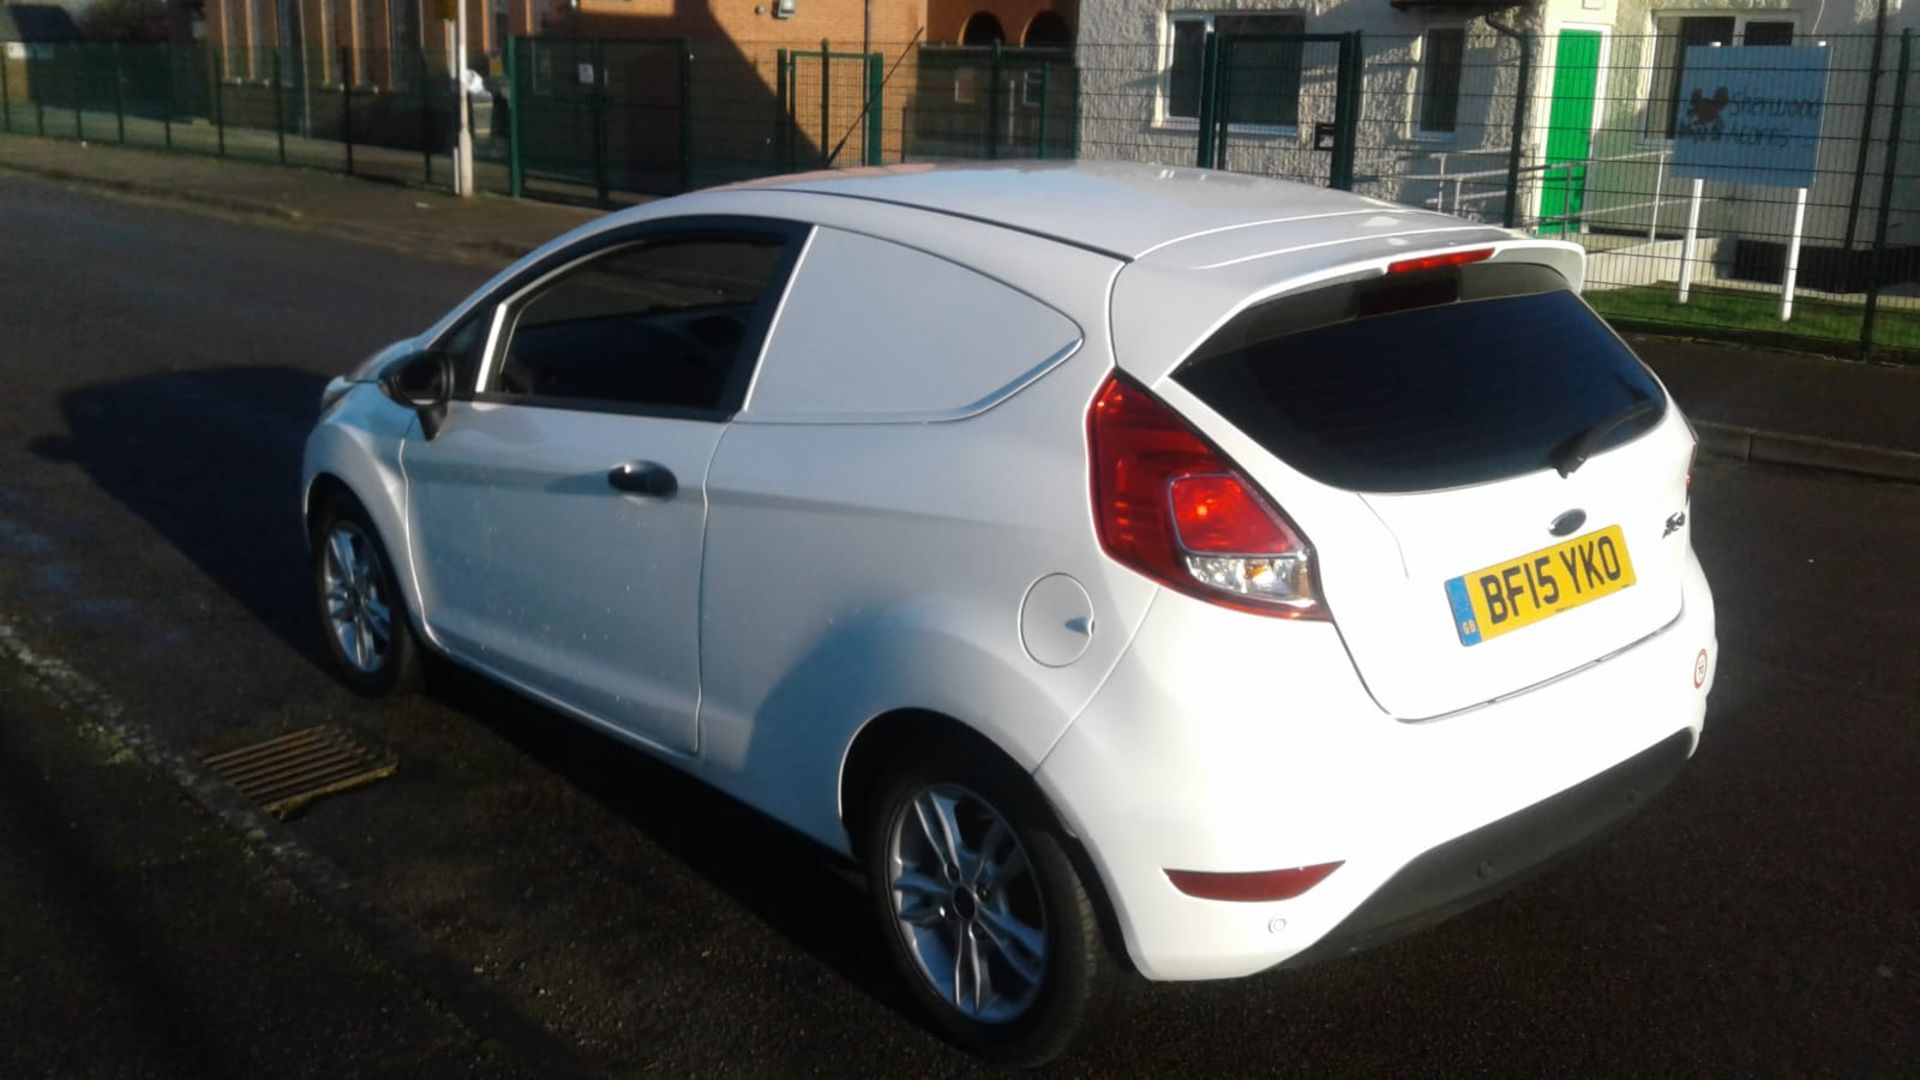 2015/15 REG FORD FIESTA ECONETIC TECH TDCI 1.6 CAR DERIVED VAN, SHOWING 0 FORMER KEEPERS *NO VAT* - Image 5 of 12